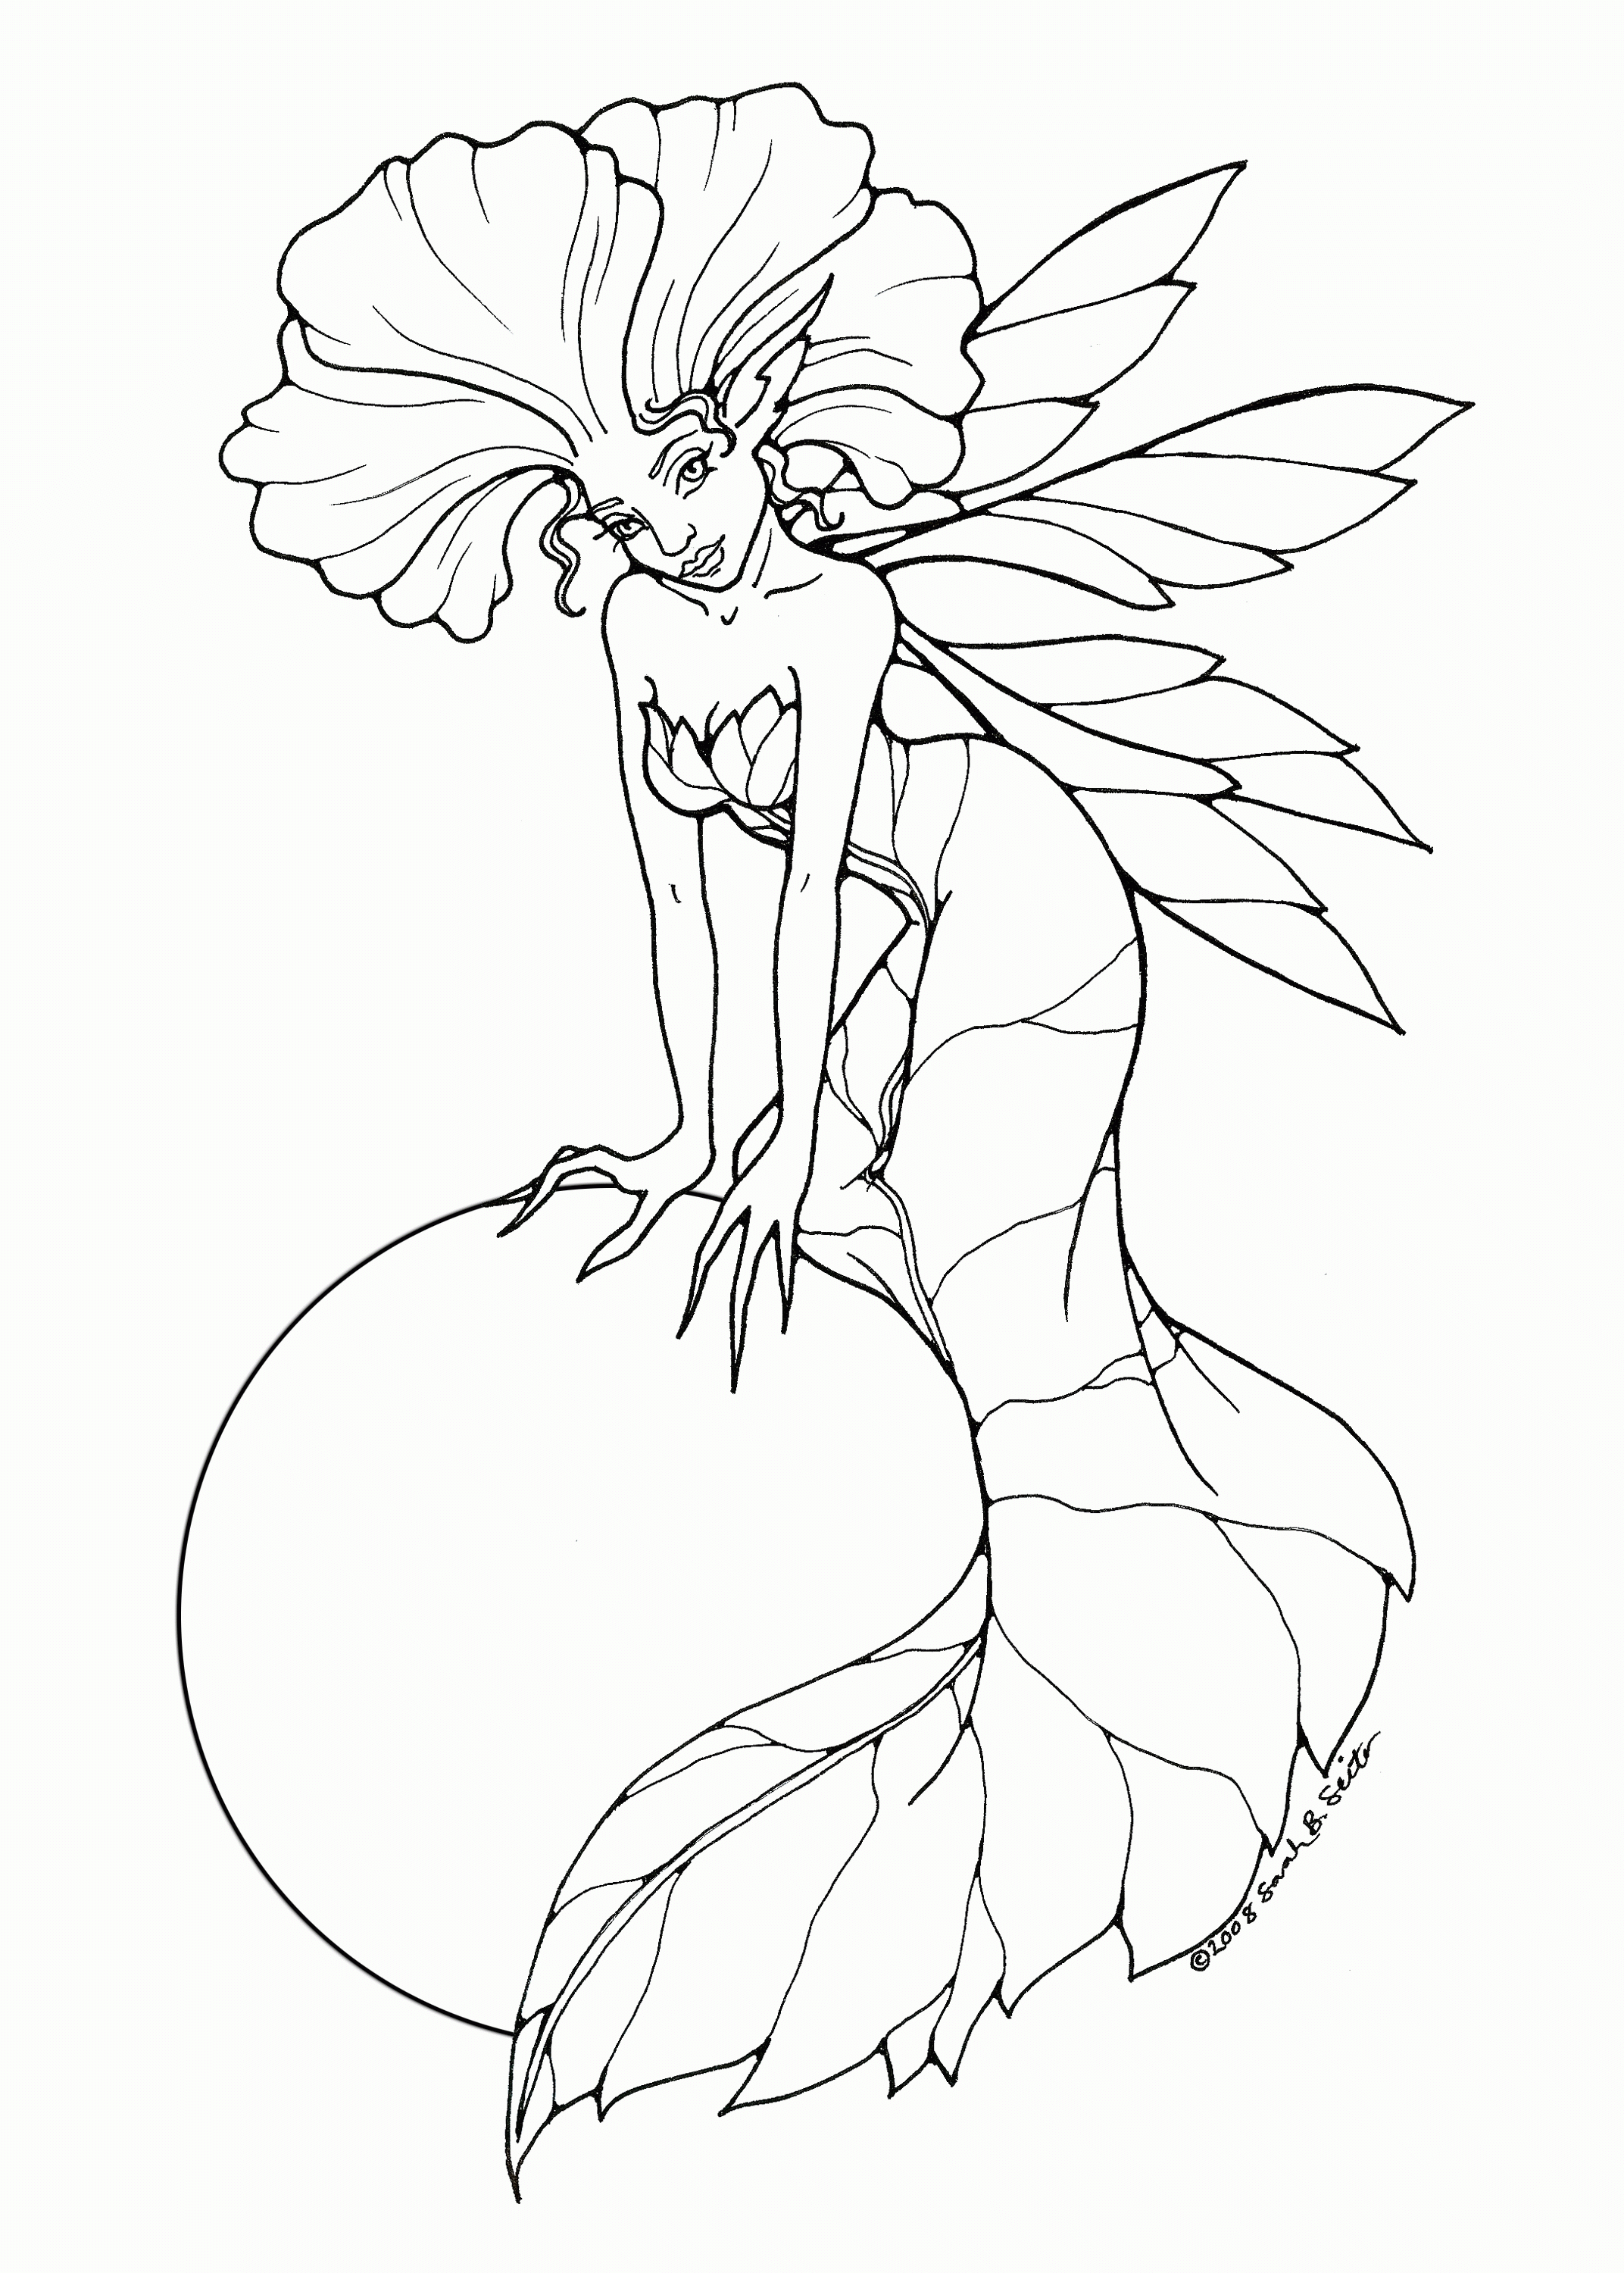 Basic Fairy Coloring Pages For Adults To Download And Print For - Free Printable Coloring Pages Fairies Adults